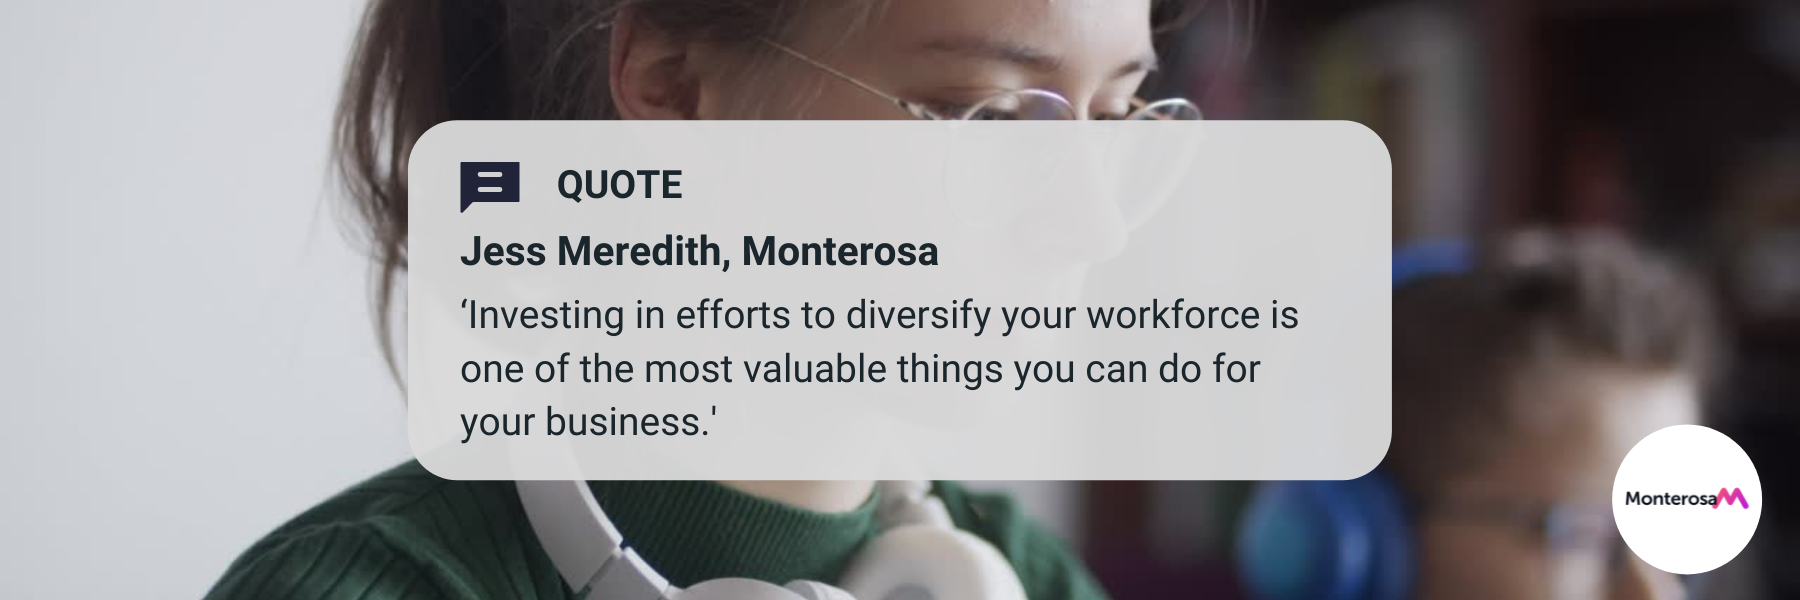 A quote from Jess Meredith about diversity in the workplace